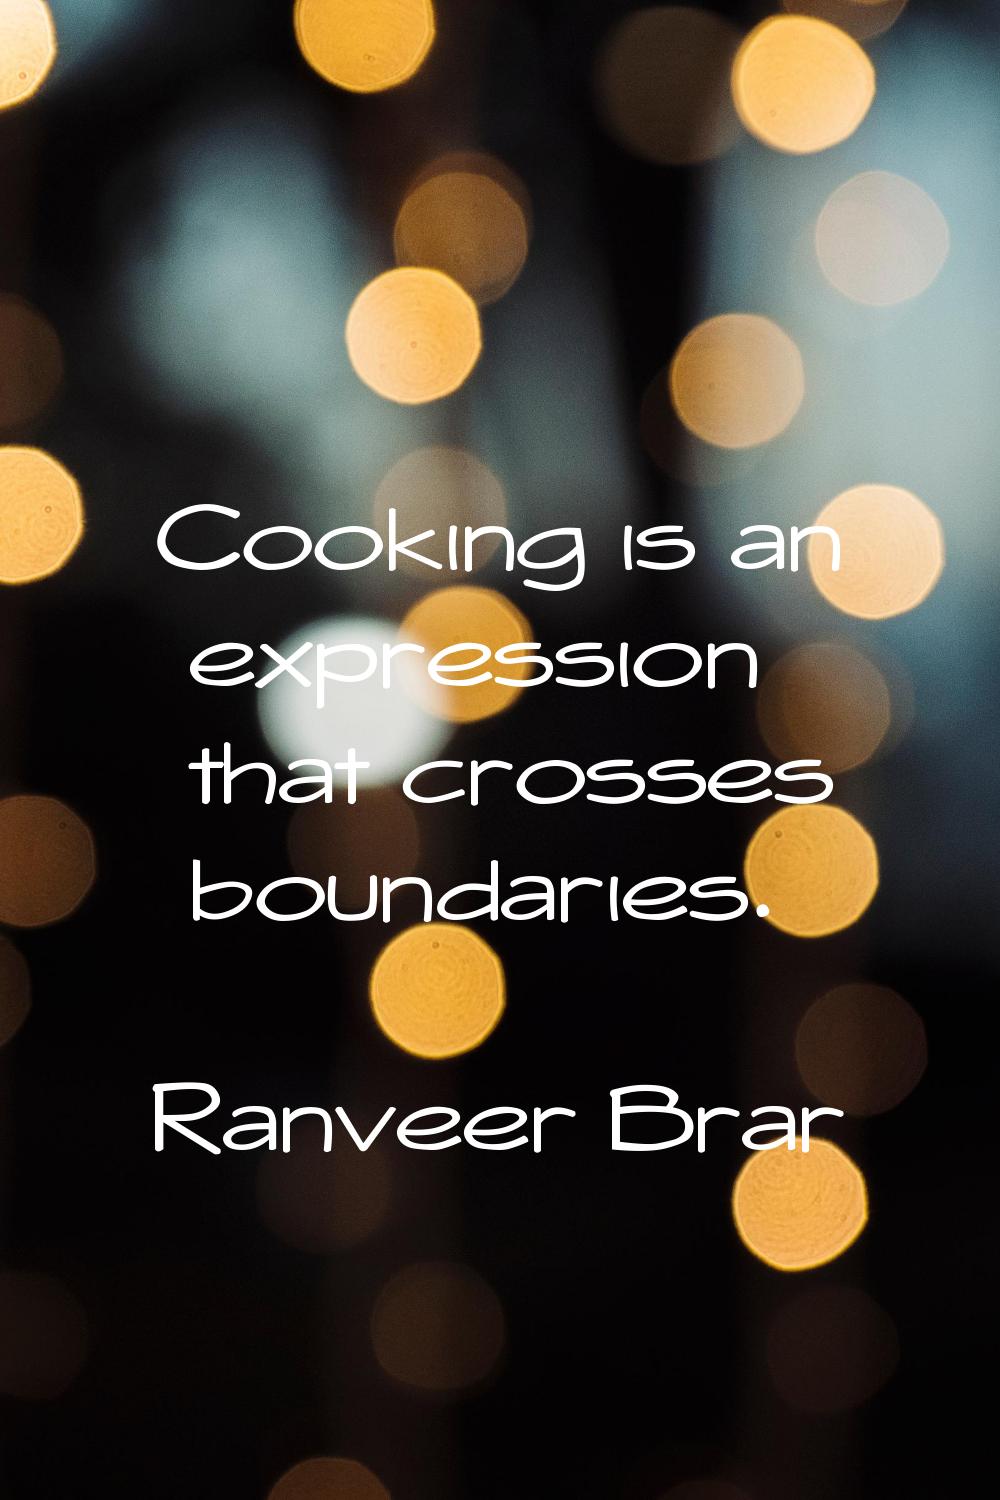 Cooking is an expression that crosses boundaries.